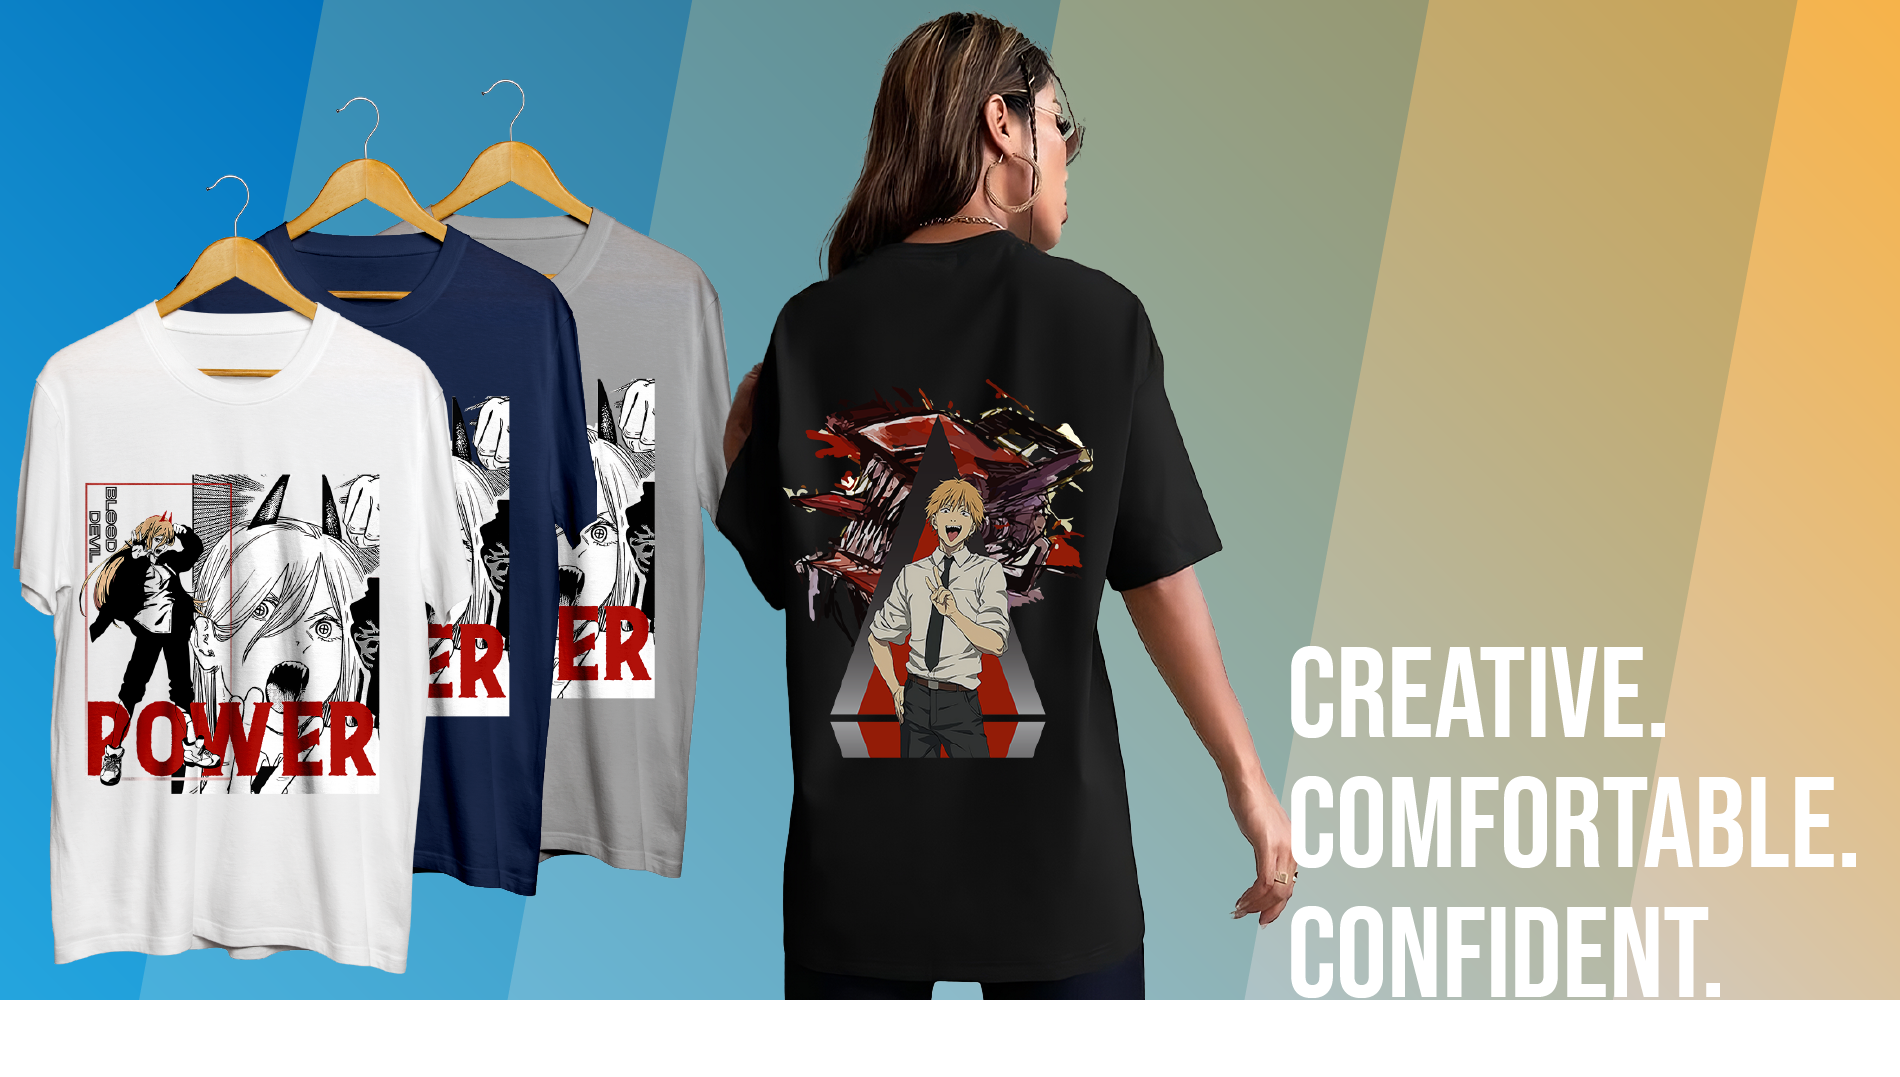 Comfortable Tshirts with Anime Prints on Bokunotrends. Creative. Comfortable. Confident.